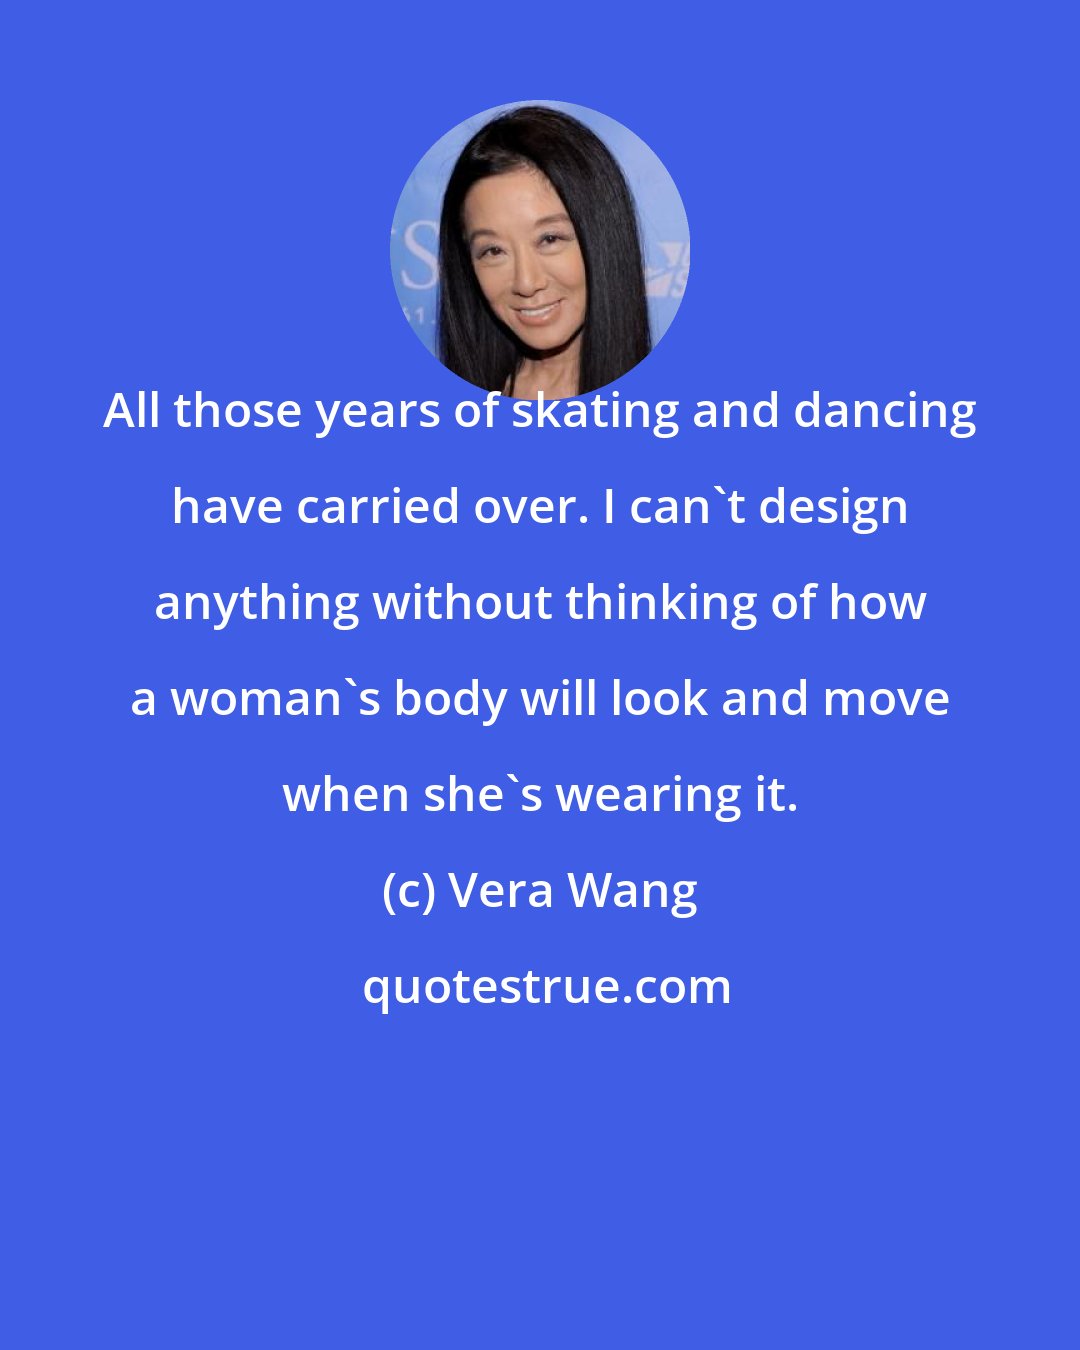 Vera Wang: All those years of skating and dancing have carried over. I can't design anything without thinking of how a woman's body will look and move when she's wearing it.